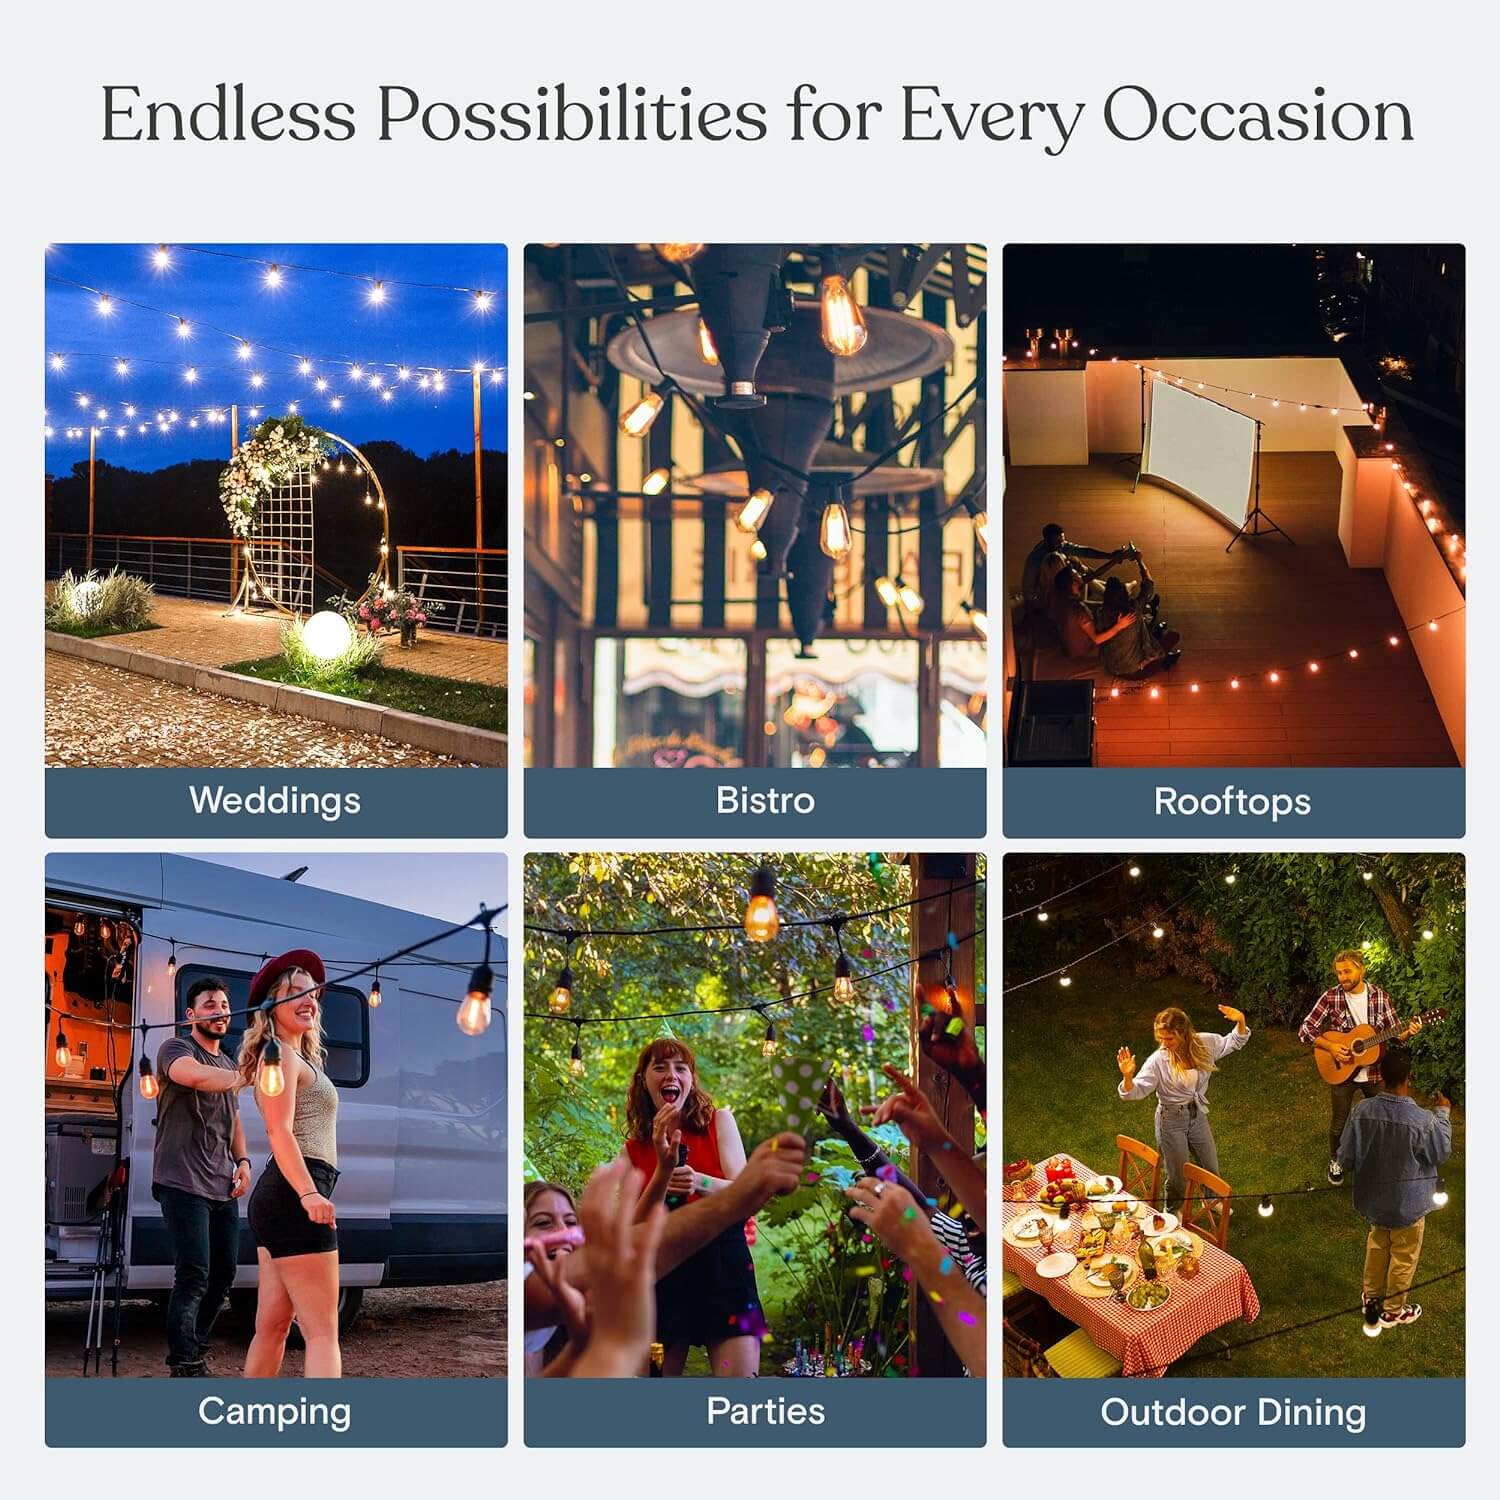 iToolmax Solar String Lights can illuminate the outdoor space outside your house at any time, for example, your garden, outdoor dining areas, pergolas, arbors, backyard, patios and deck and even trees and bushes. Add warmth and charm to the landscape.